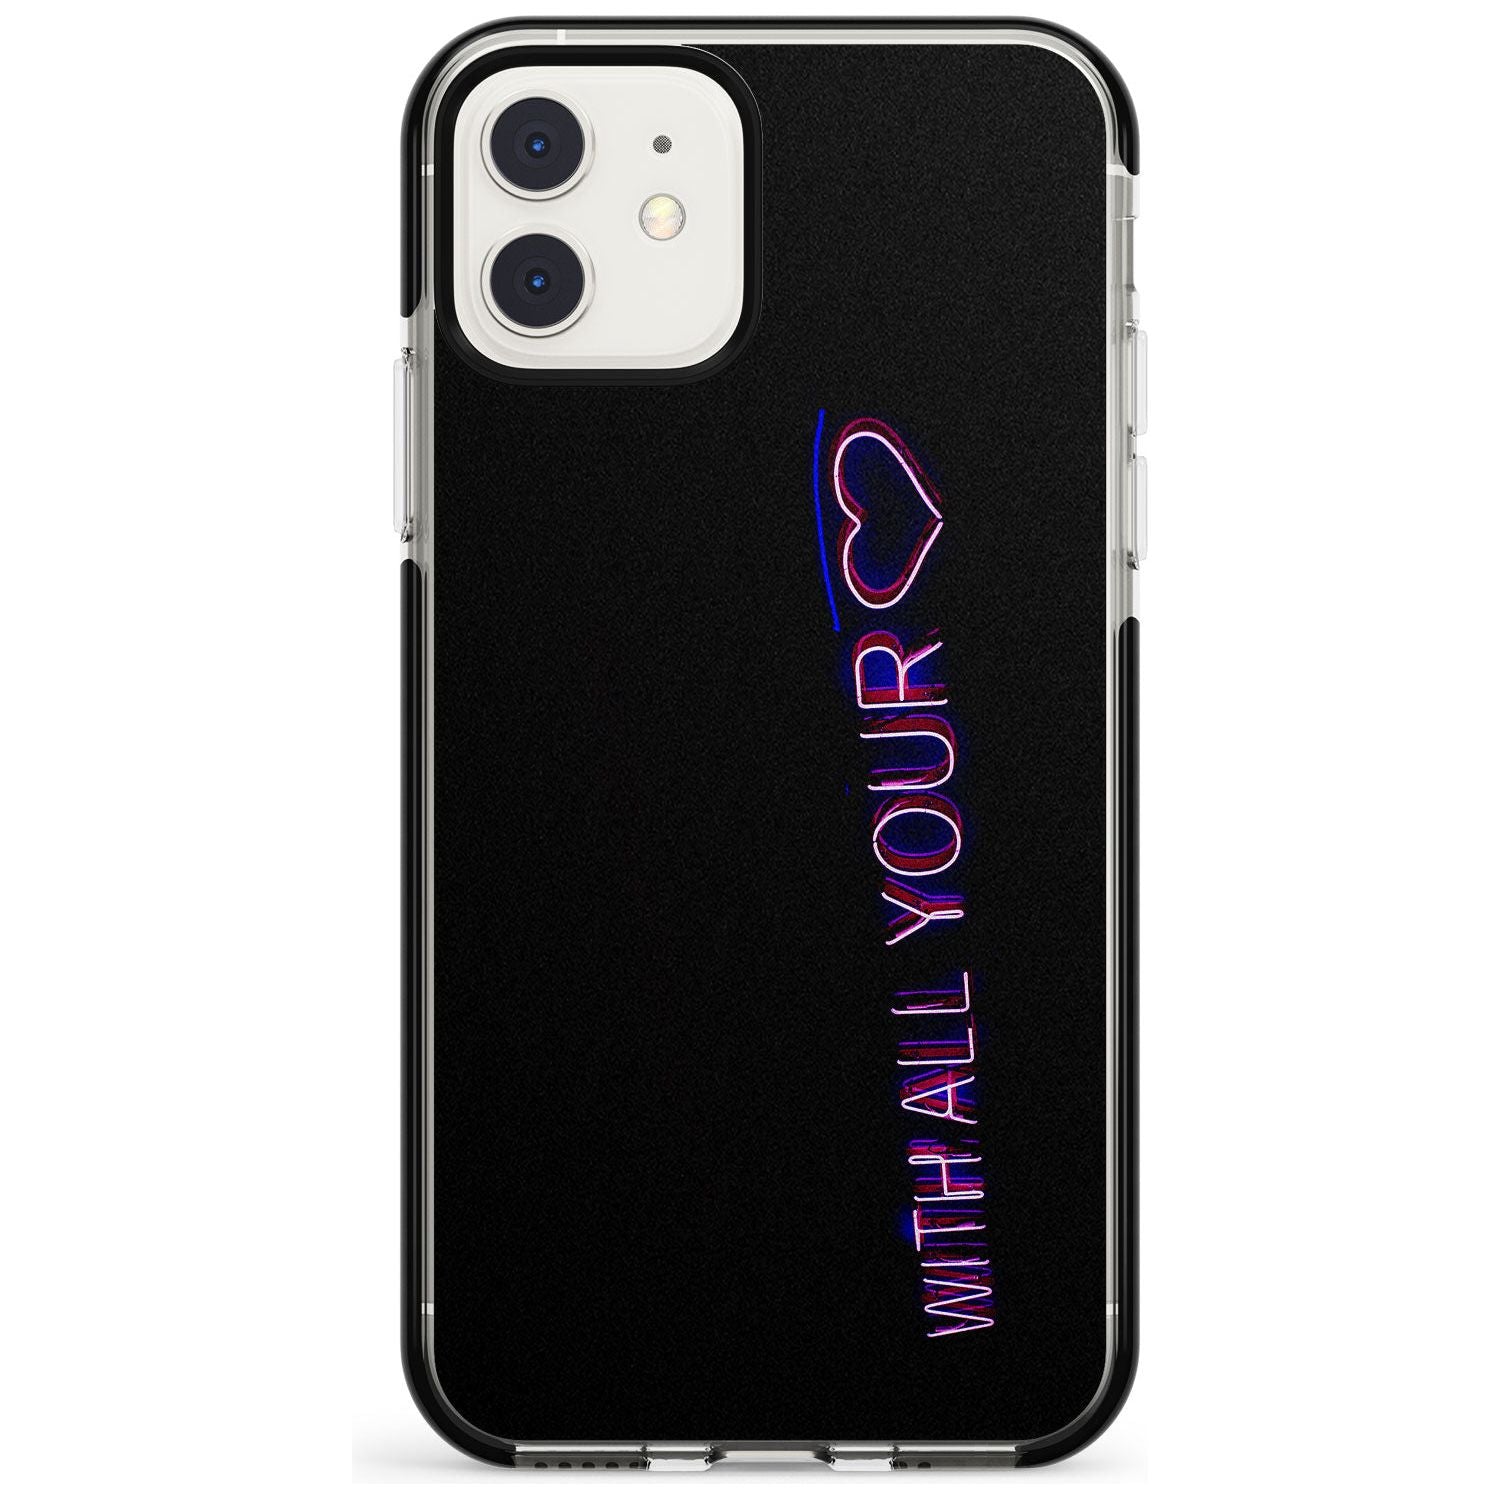 With All Your Heart Neon Sign Black Impact Phone Case for iPhone 11